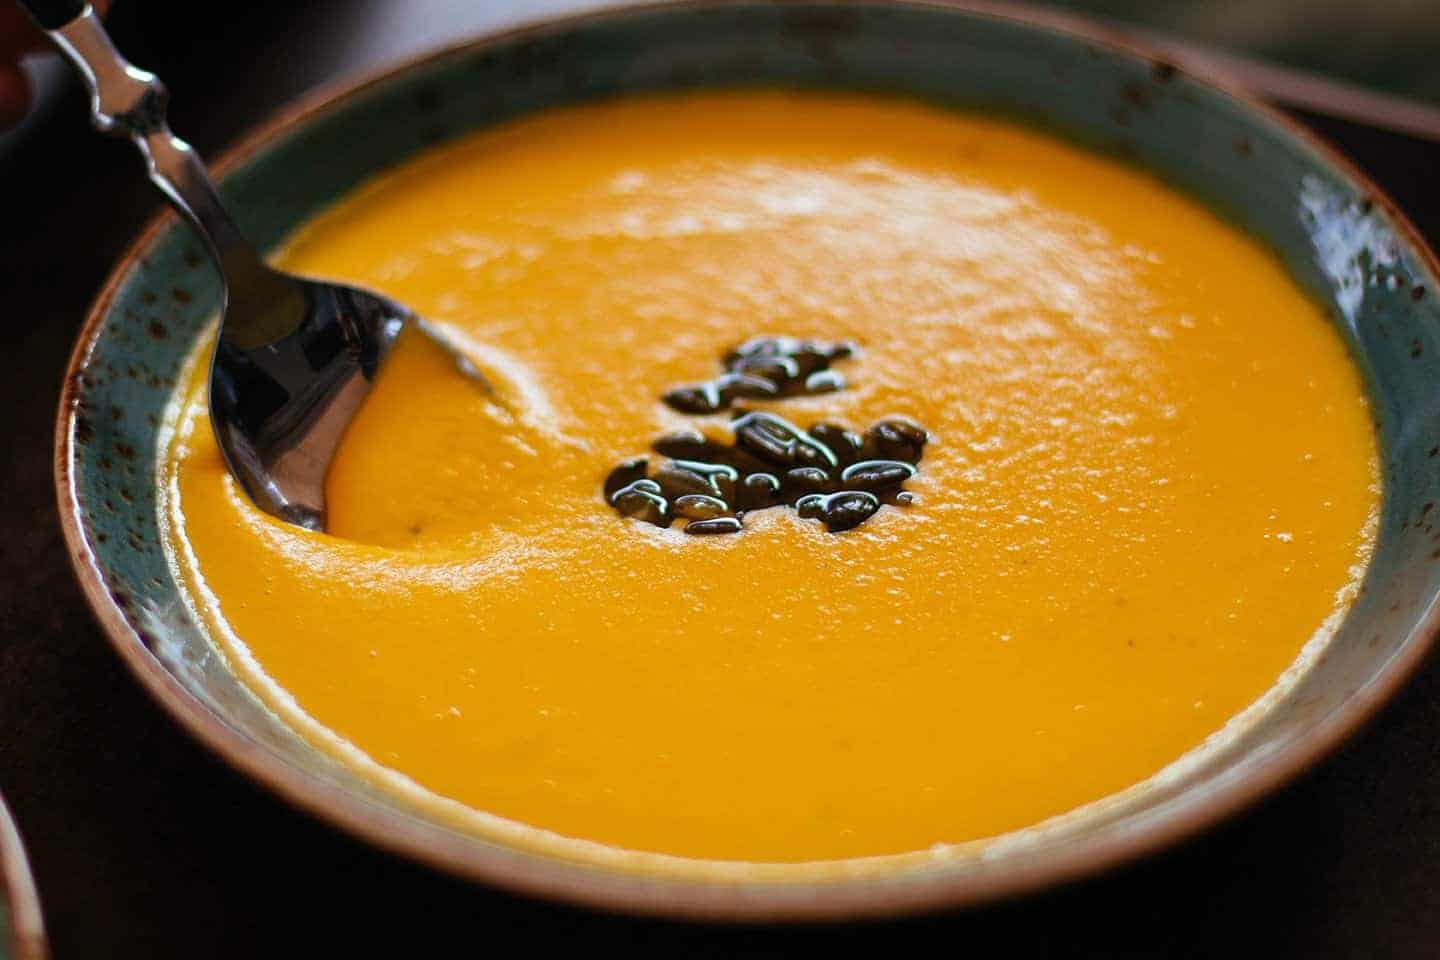 Spiced carrot and lentil soup in a bowl with black bean topping